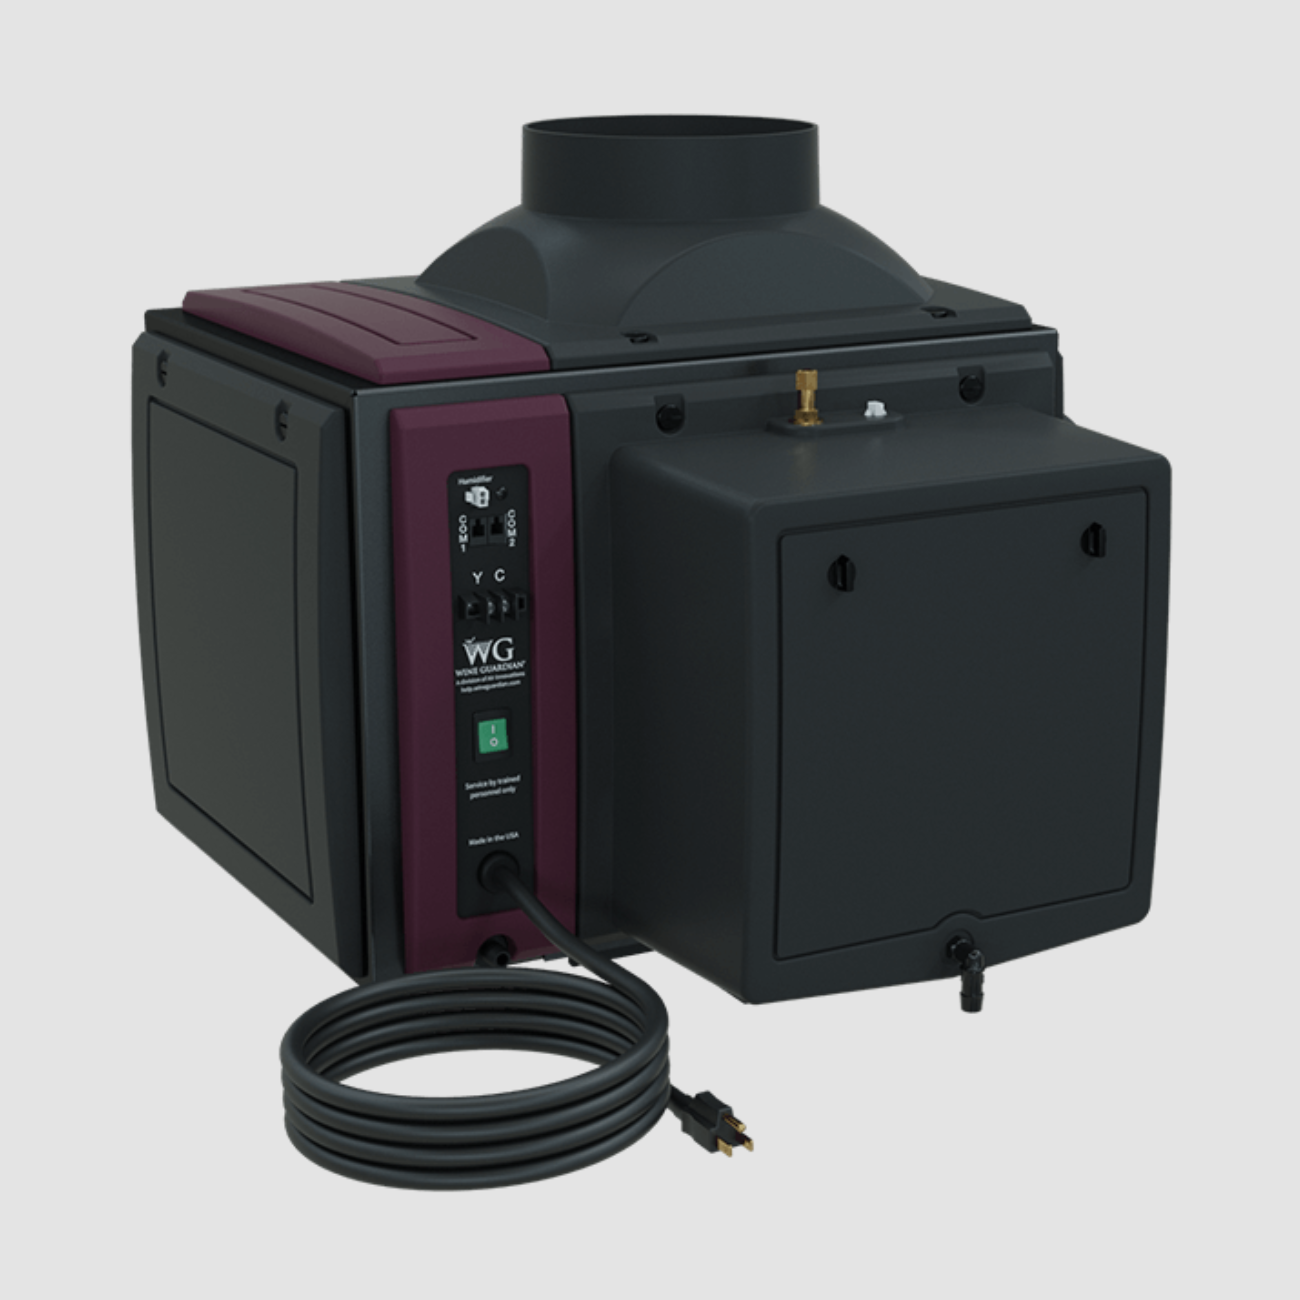 WINEGUARDIAND S025 SPLIT COOLING UNIT - Integrated humidifier